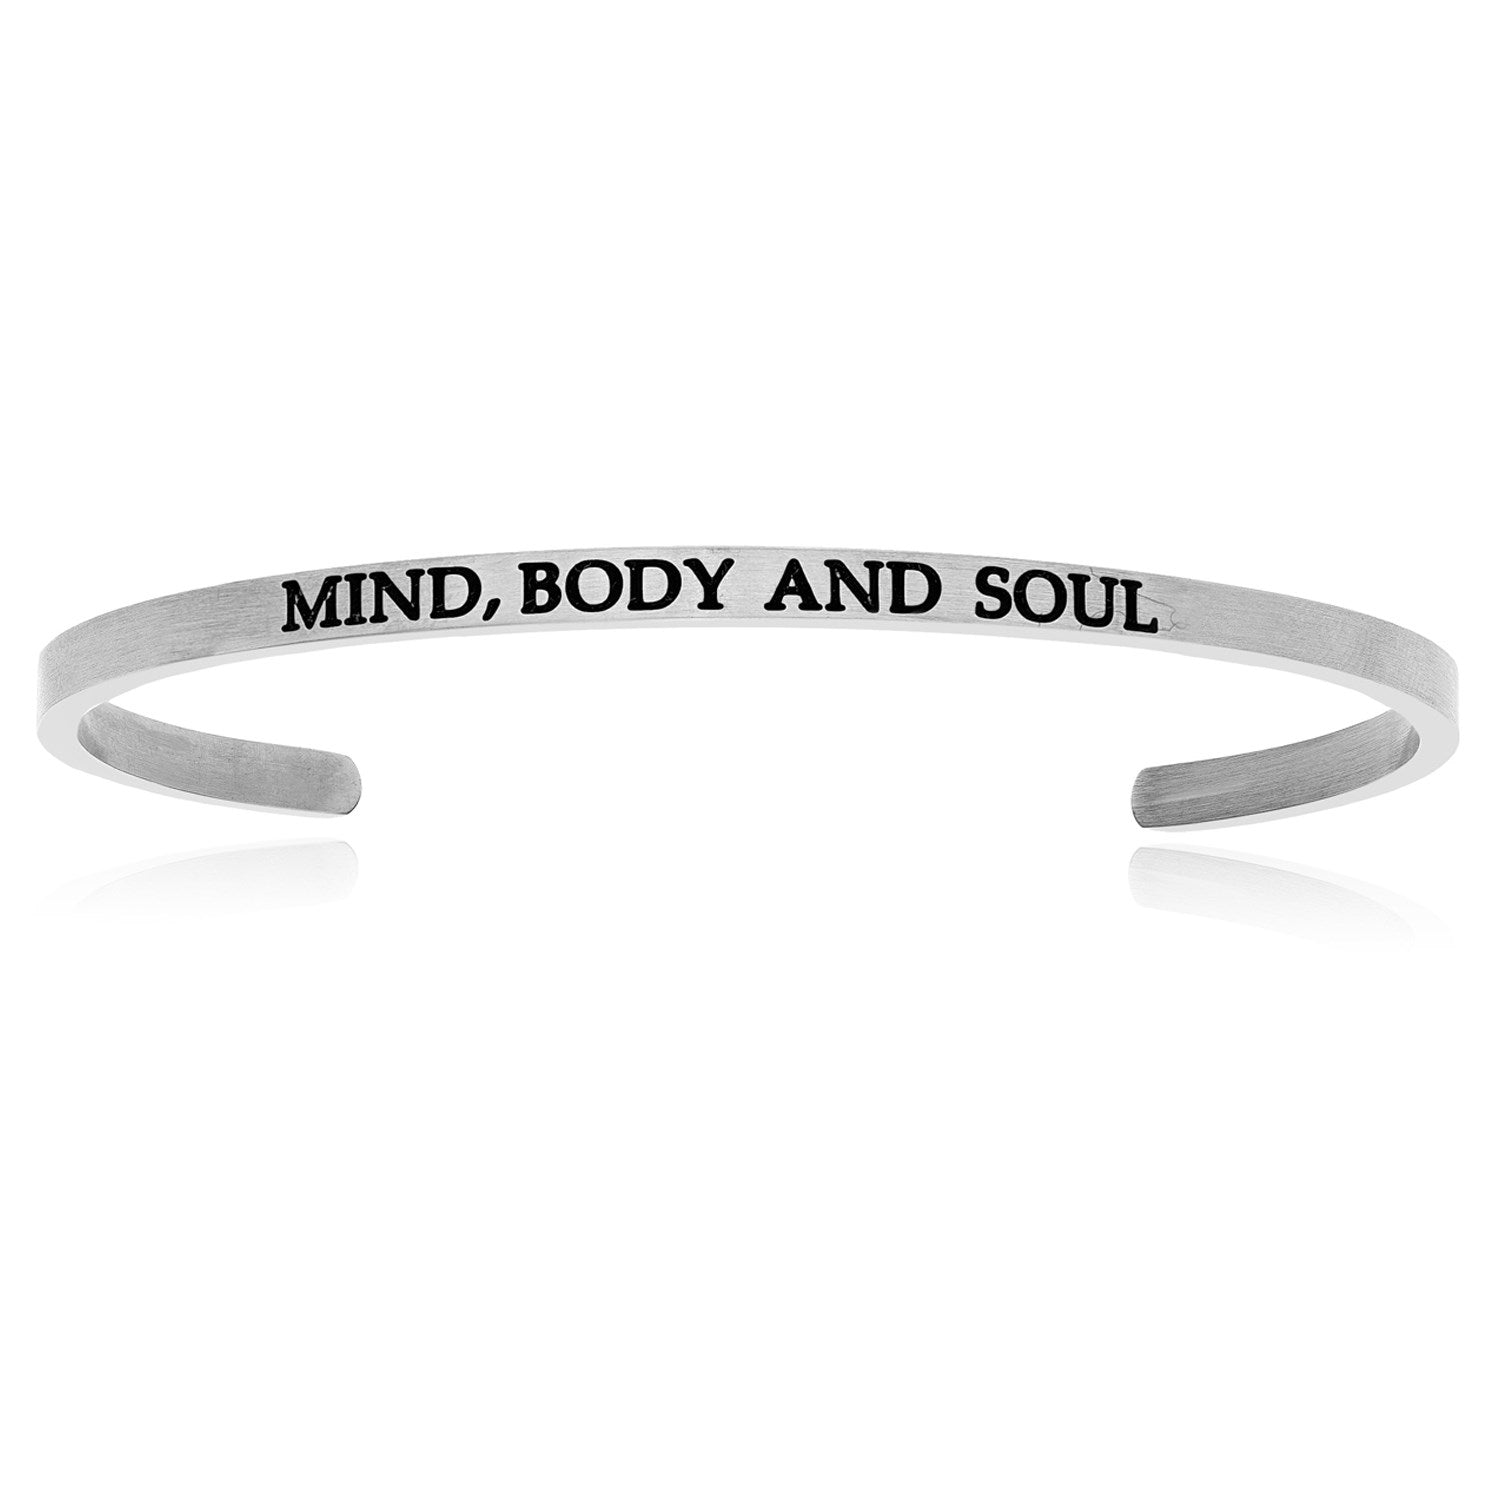 Stainless Steel Mind,  Body And Soul Cuff Bracelet